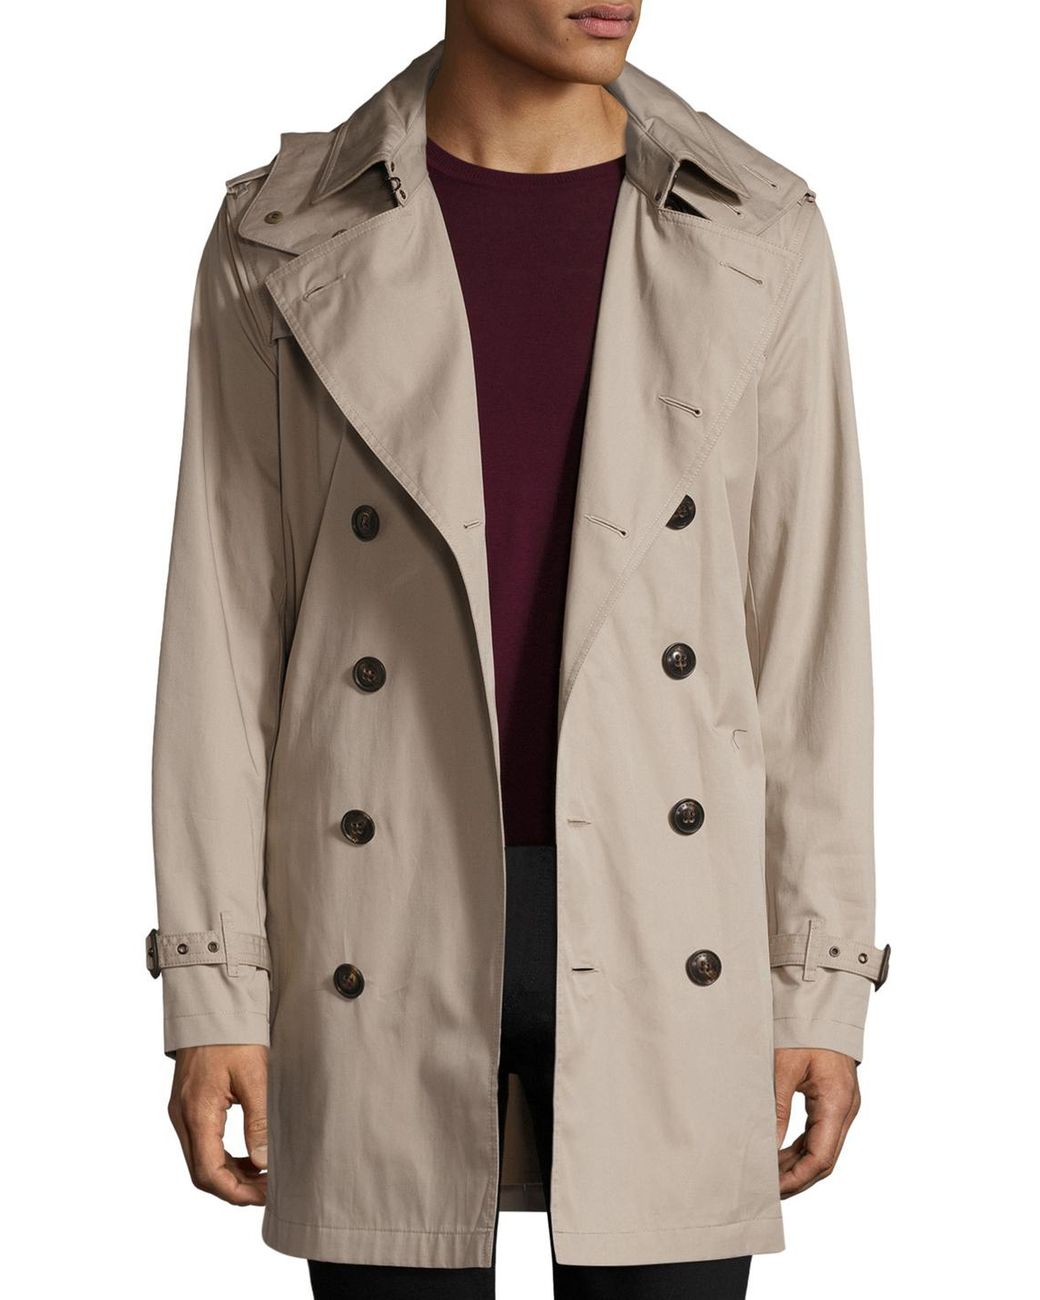 Burberry Delsworth Hooded Trench Coat in Natural | Lyst